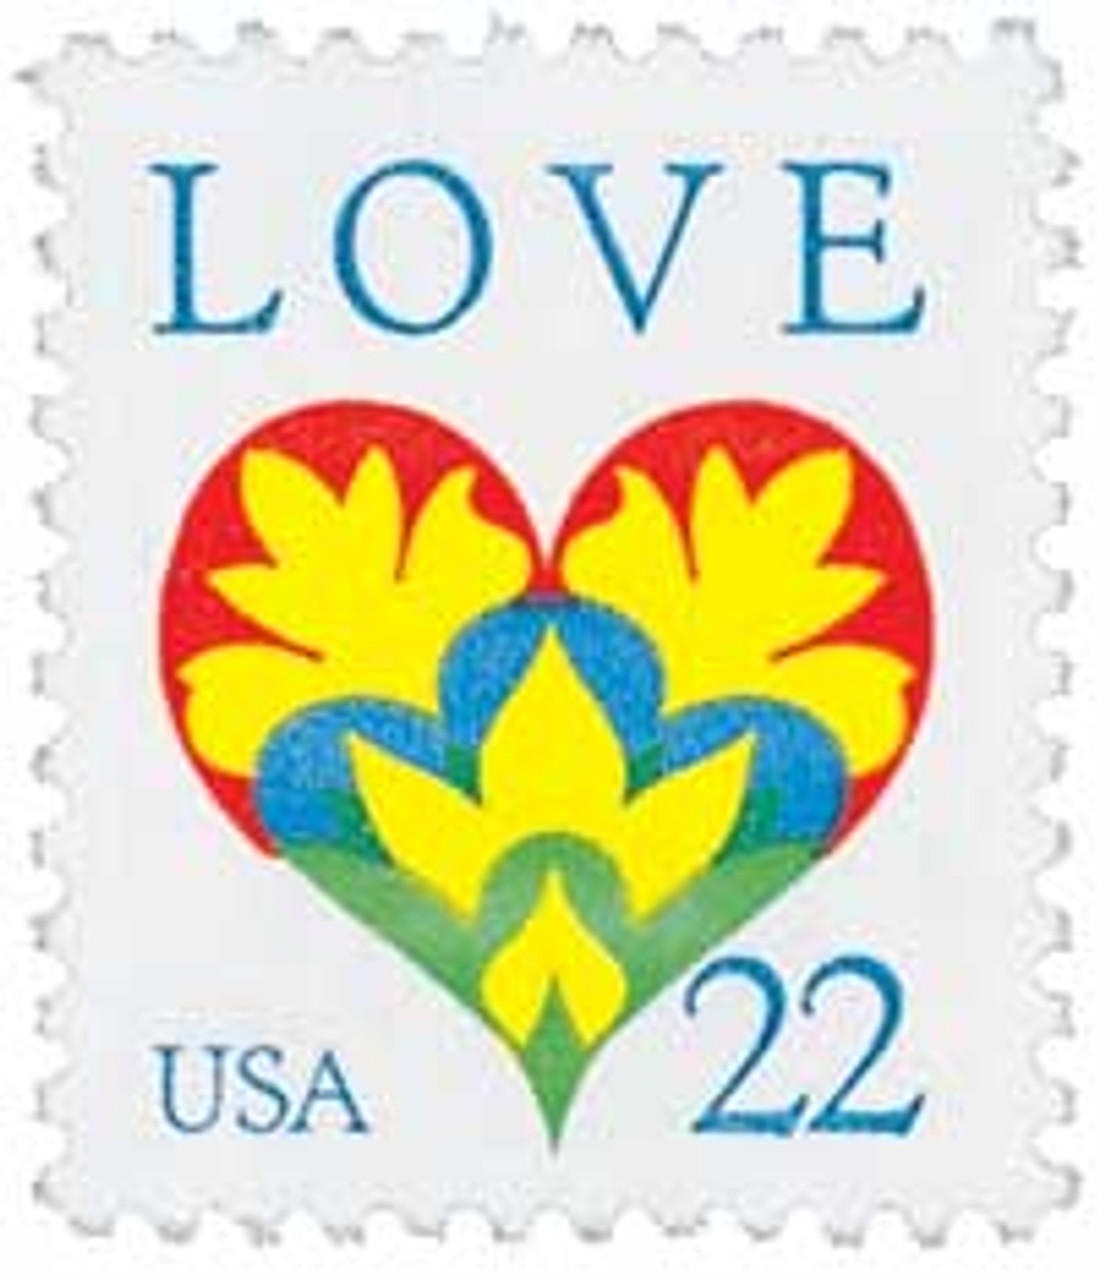 4270 - 2008 42c Love Series: All Heart - Mystic Stamp Company